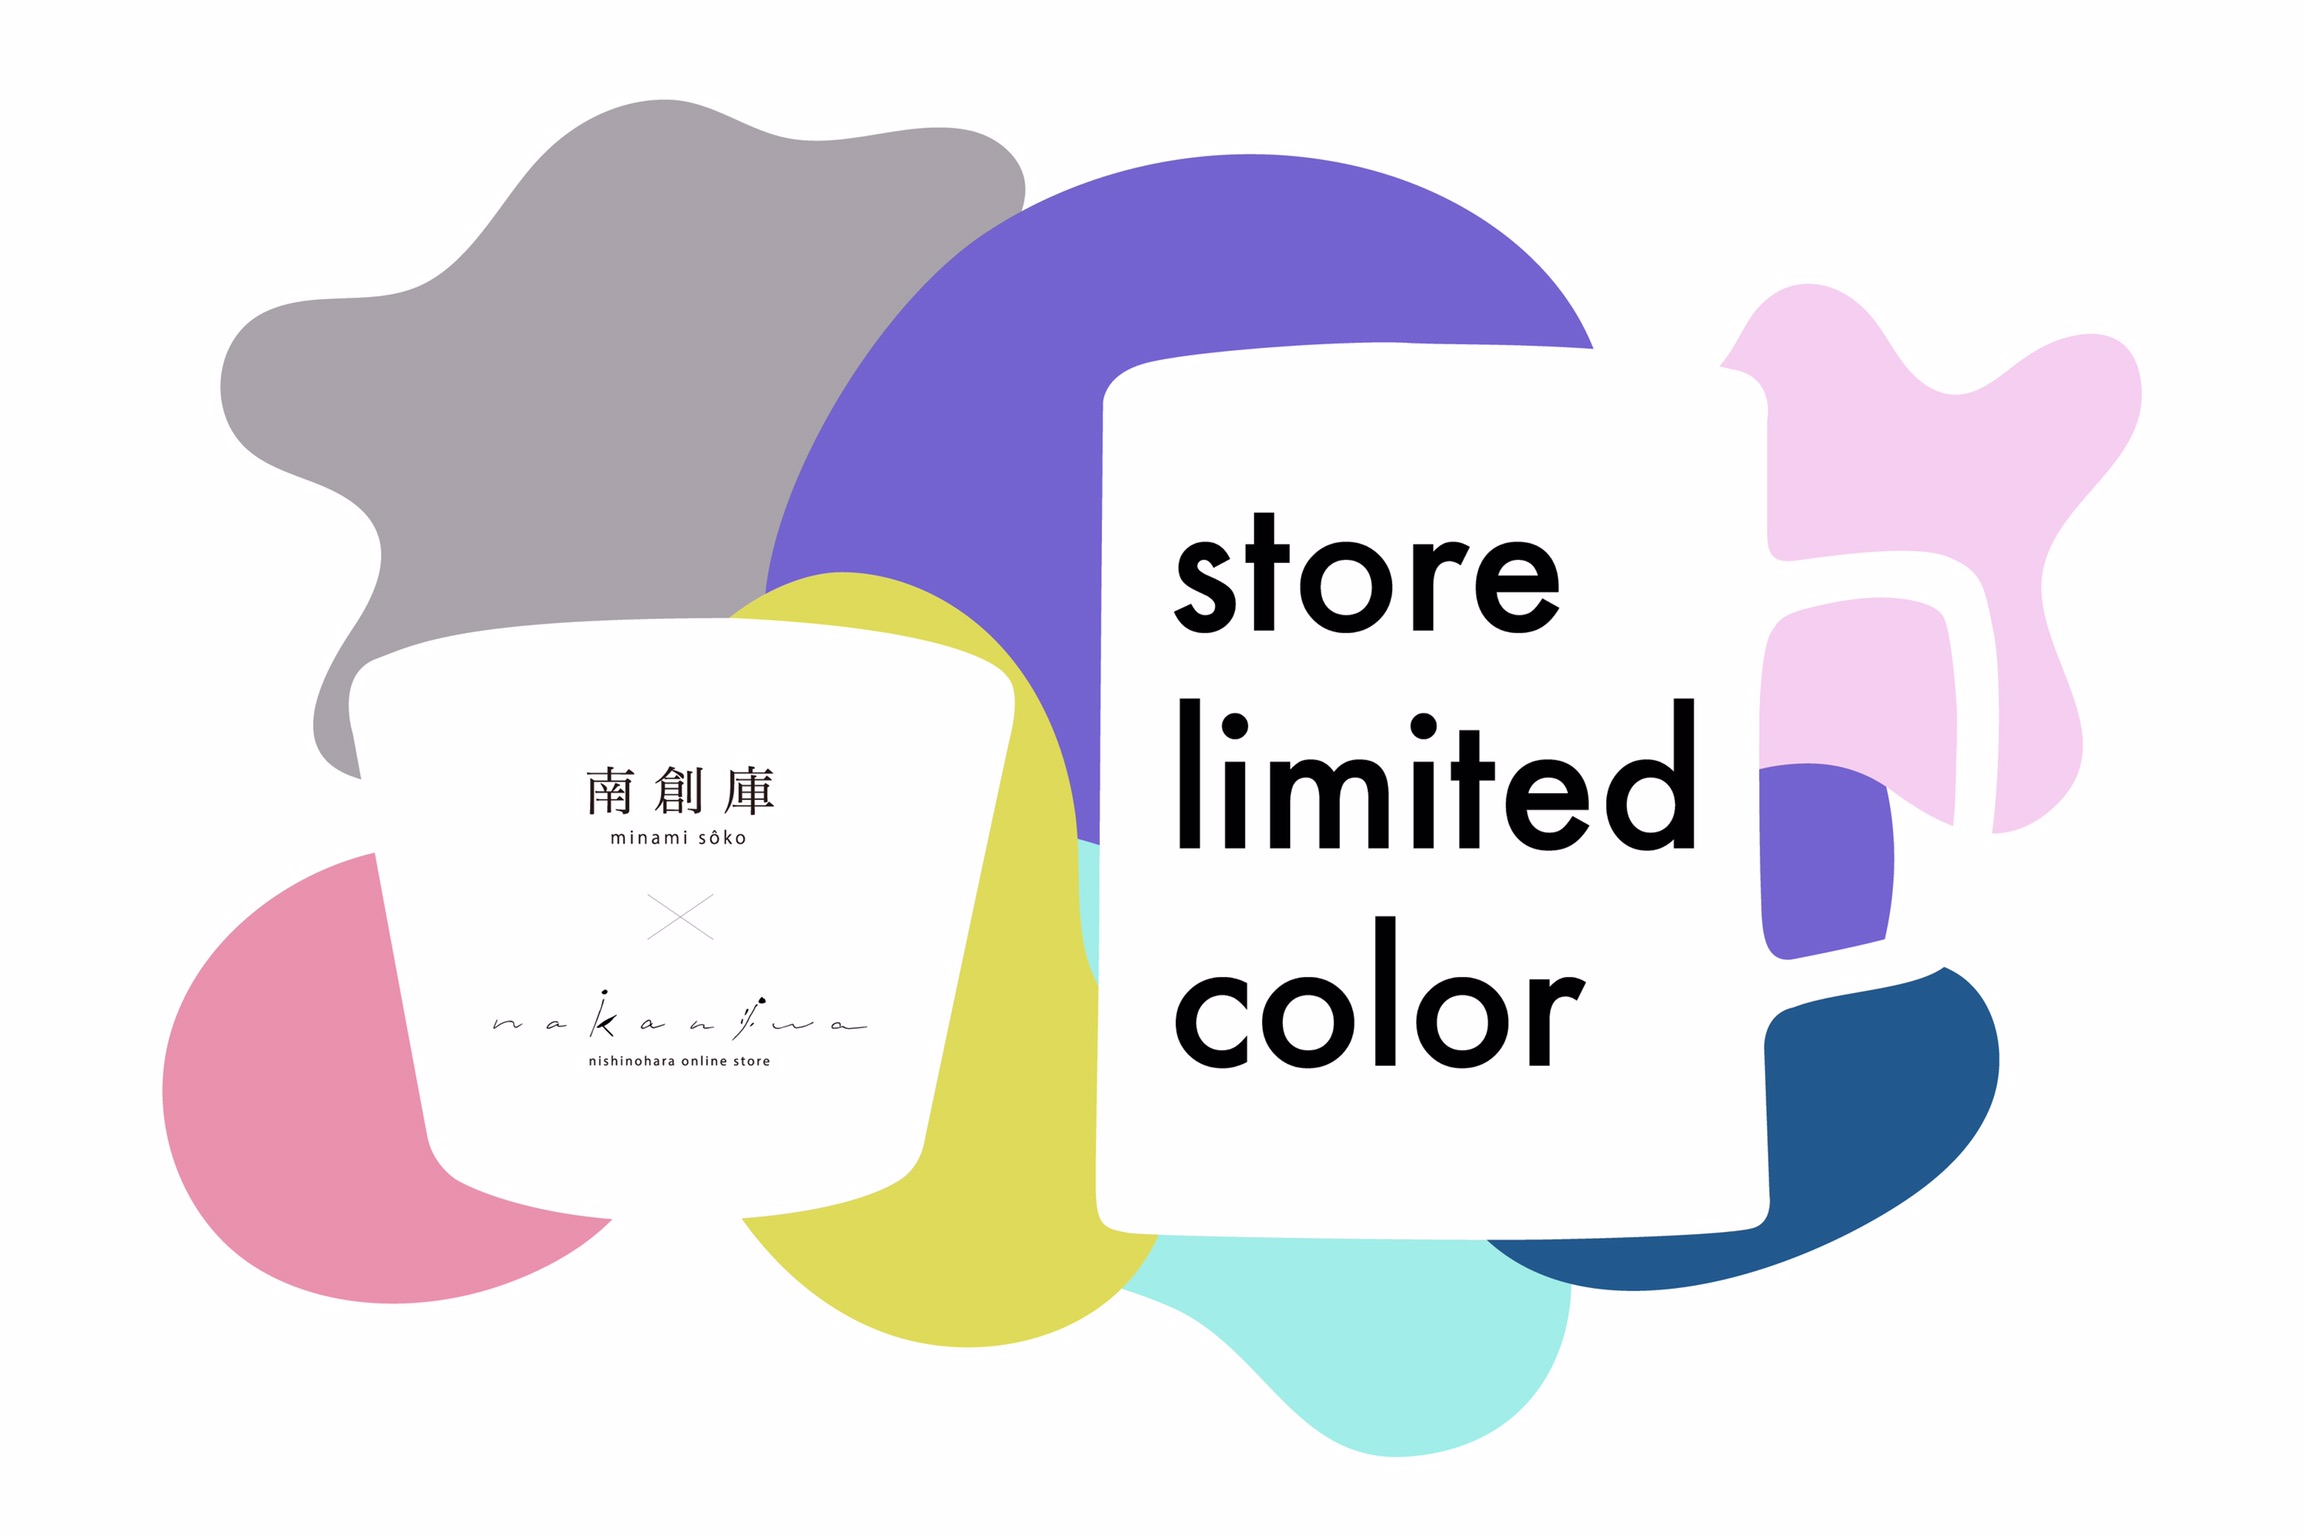 store limited color